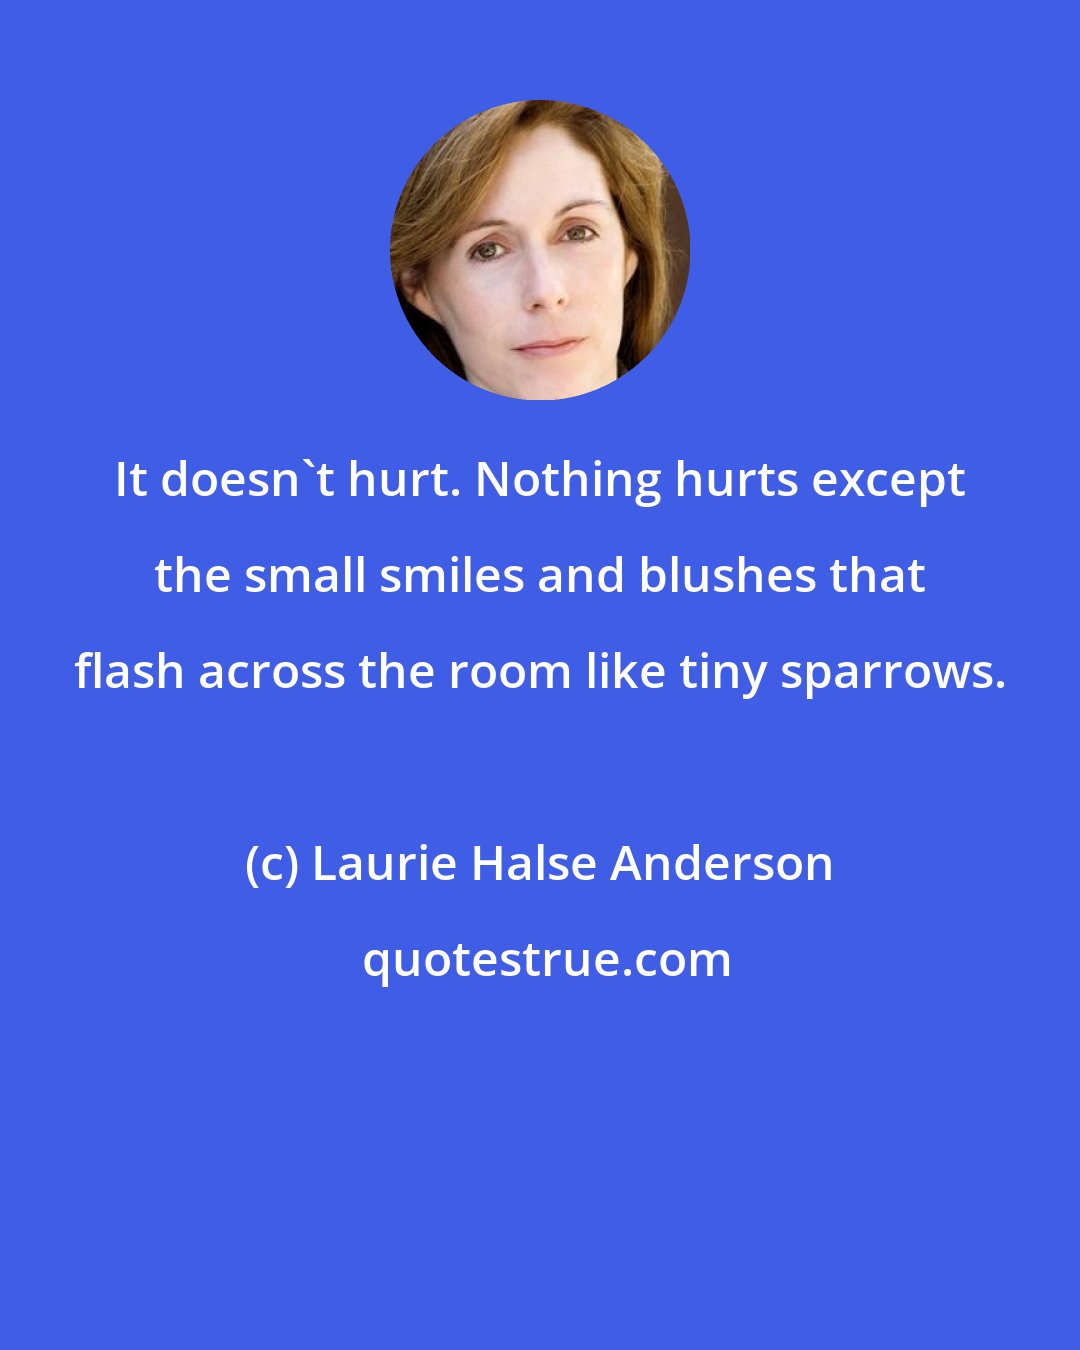 Laurie Halse Anderson: It doesn't hurt. Nothing hurts except the small smiles and blushes that flash across the room like tiny sparrows.